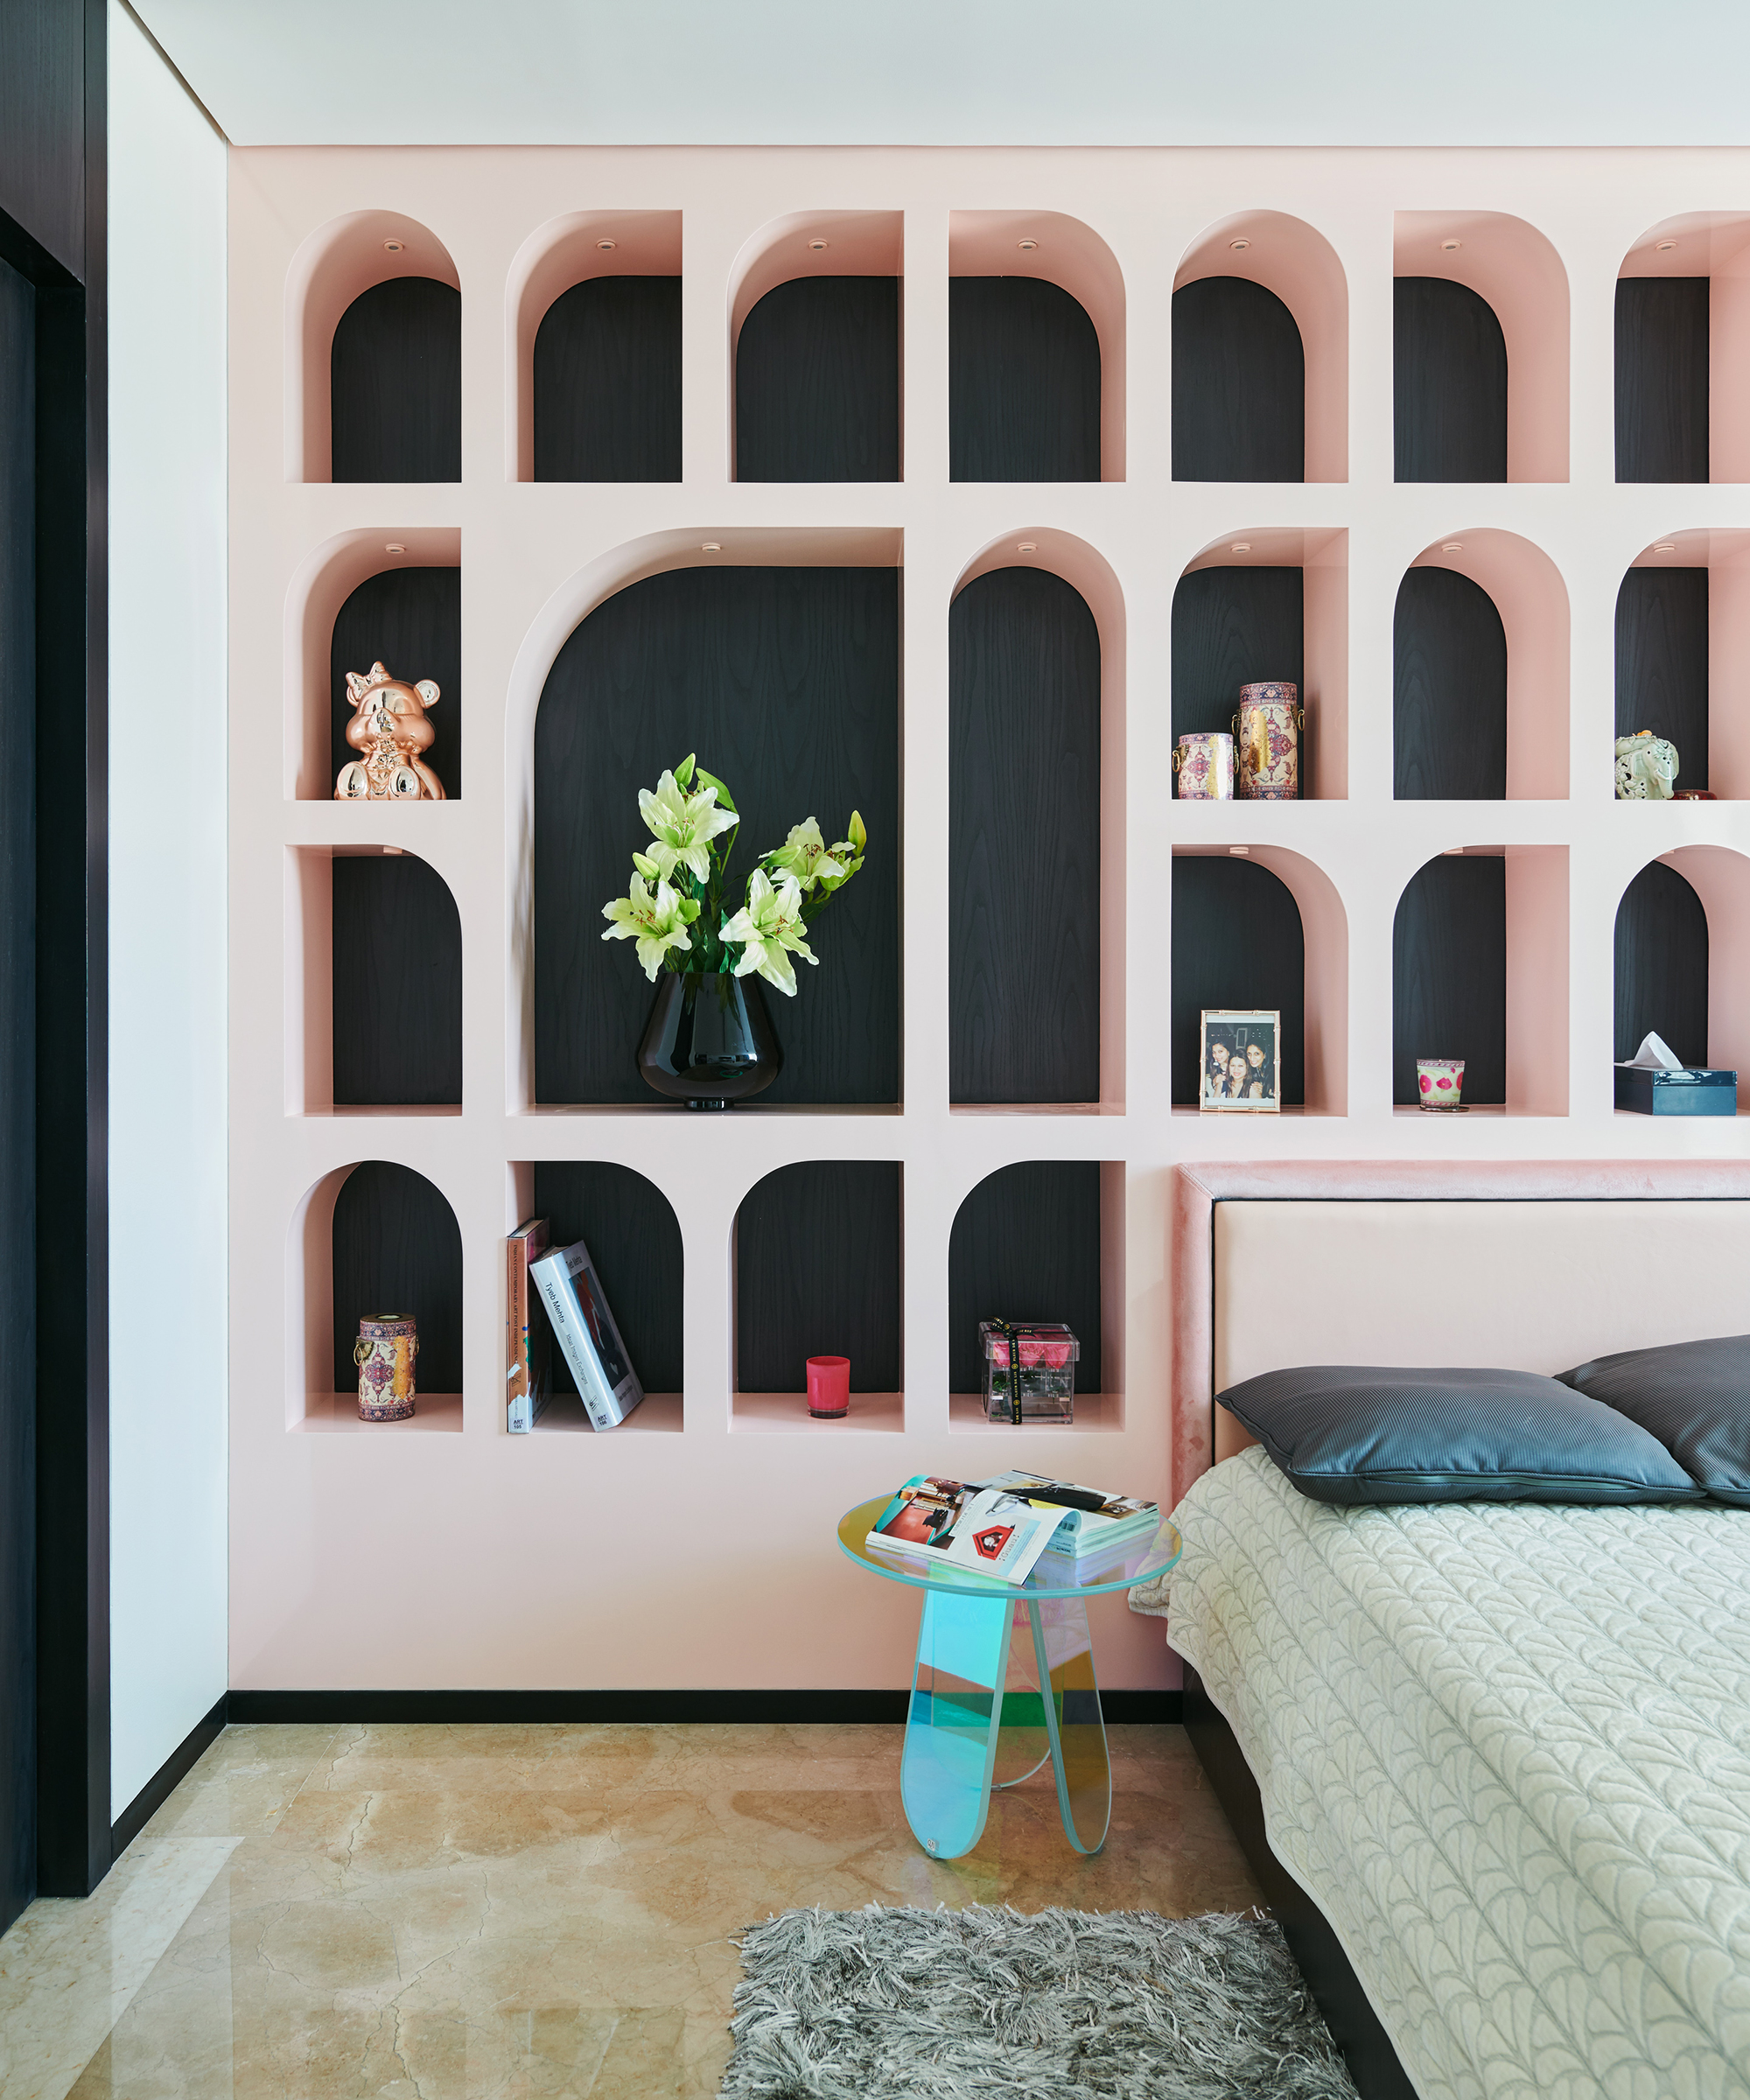 Clever Ways To Integrate Bedroom Shelves Into Your Next Design Project